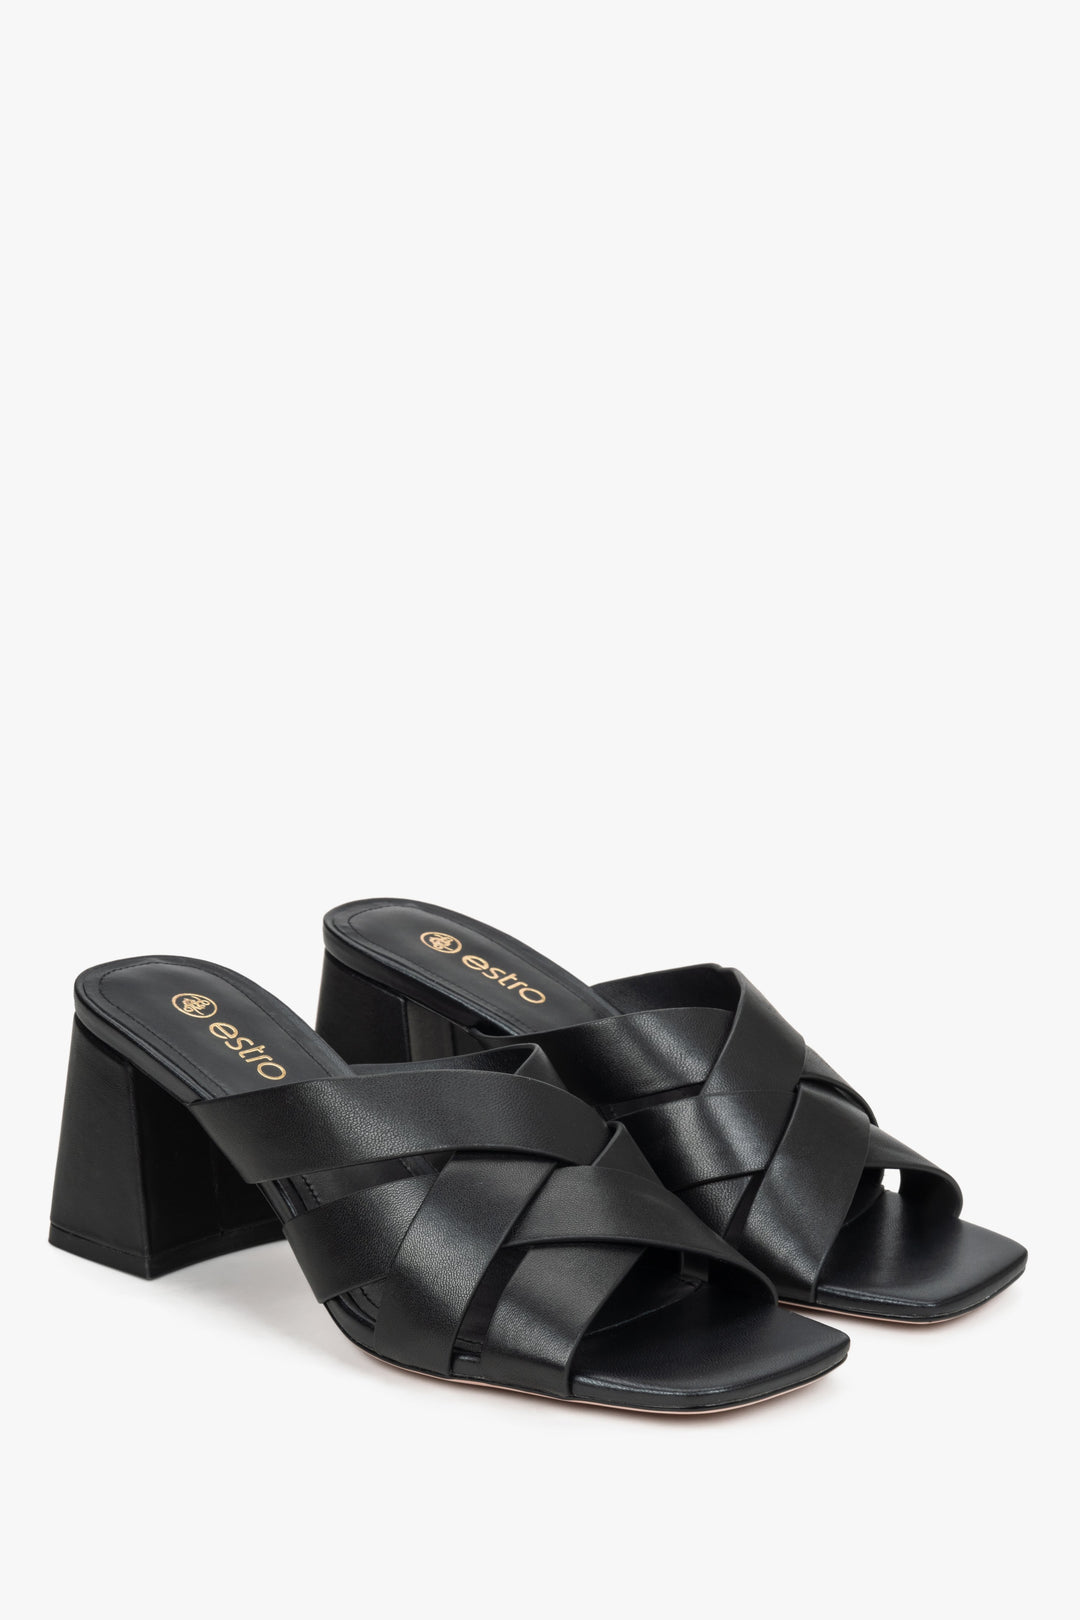 Leather women's black sandals with a block heel by Estro.